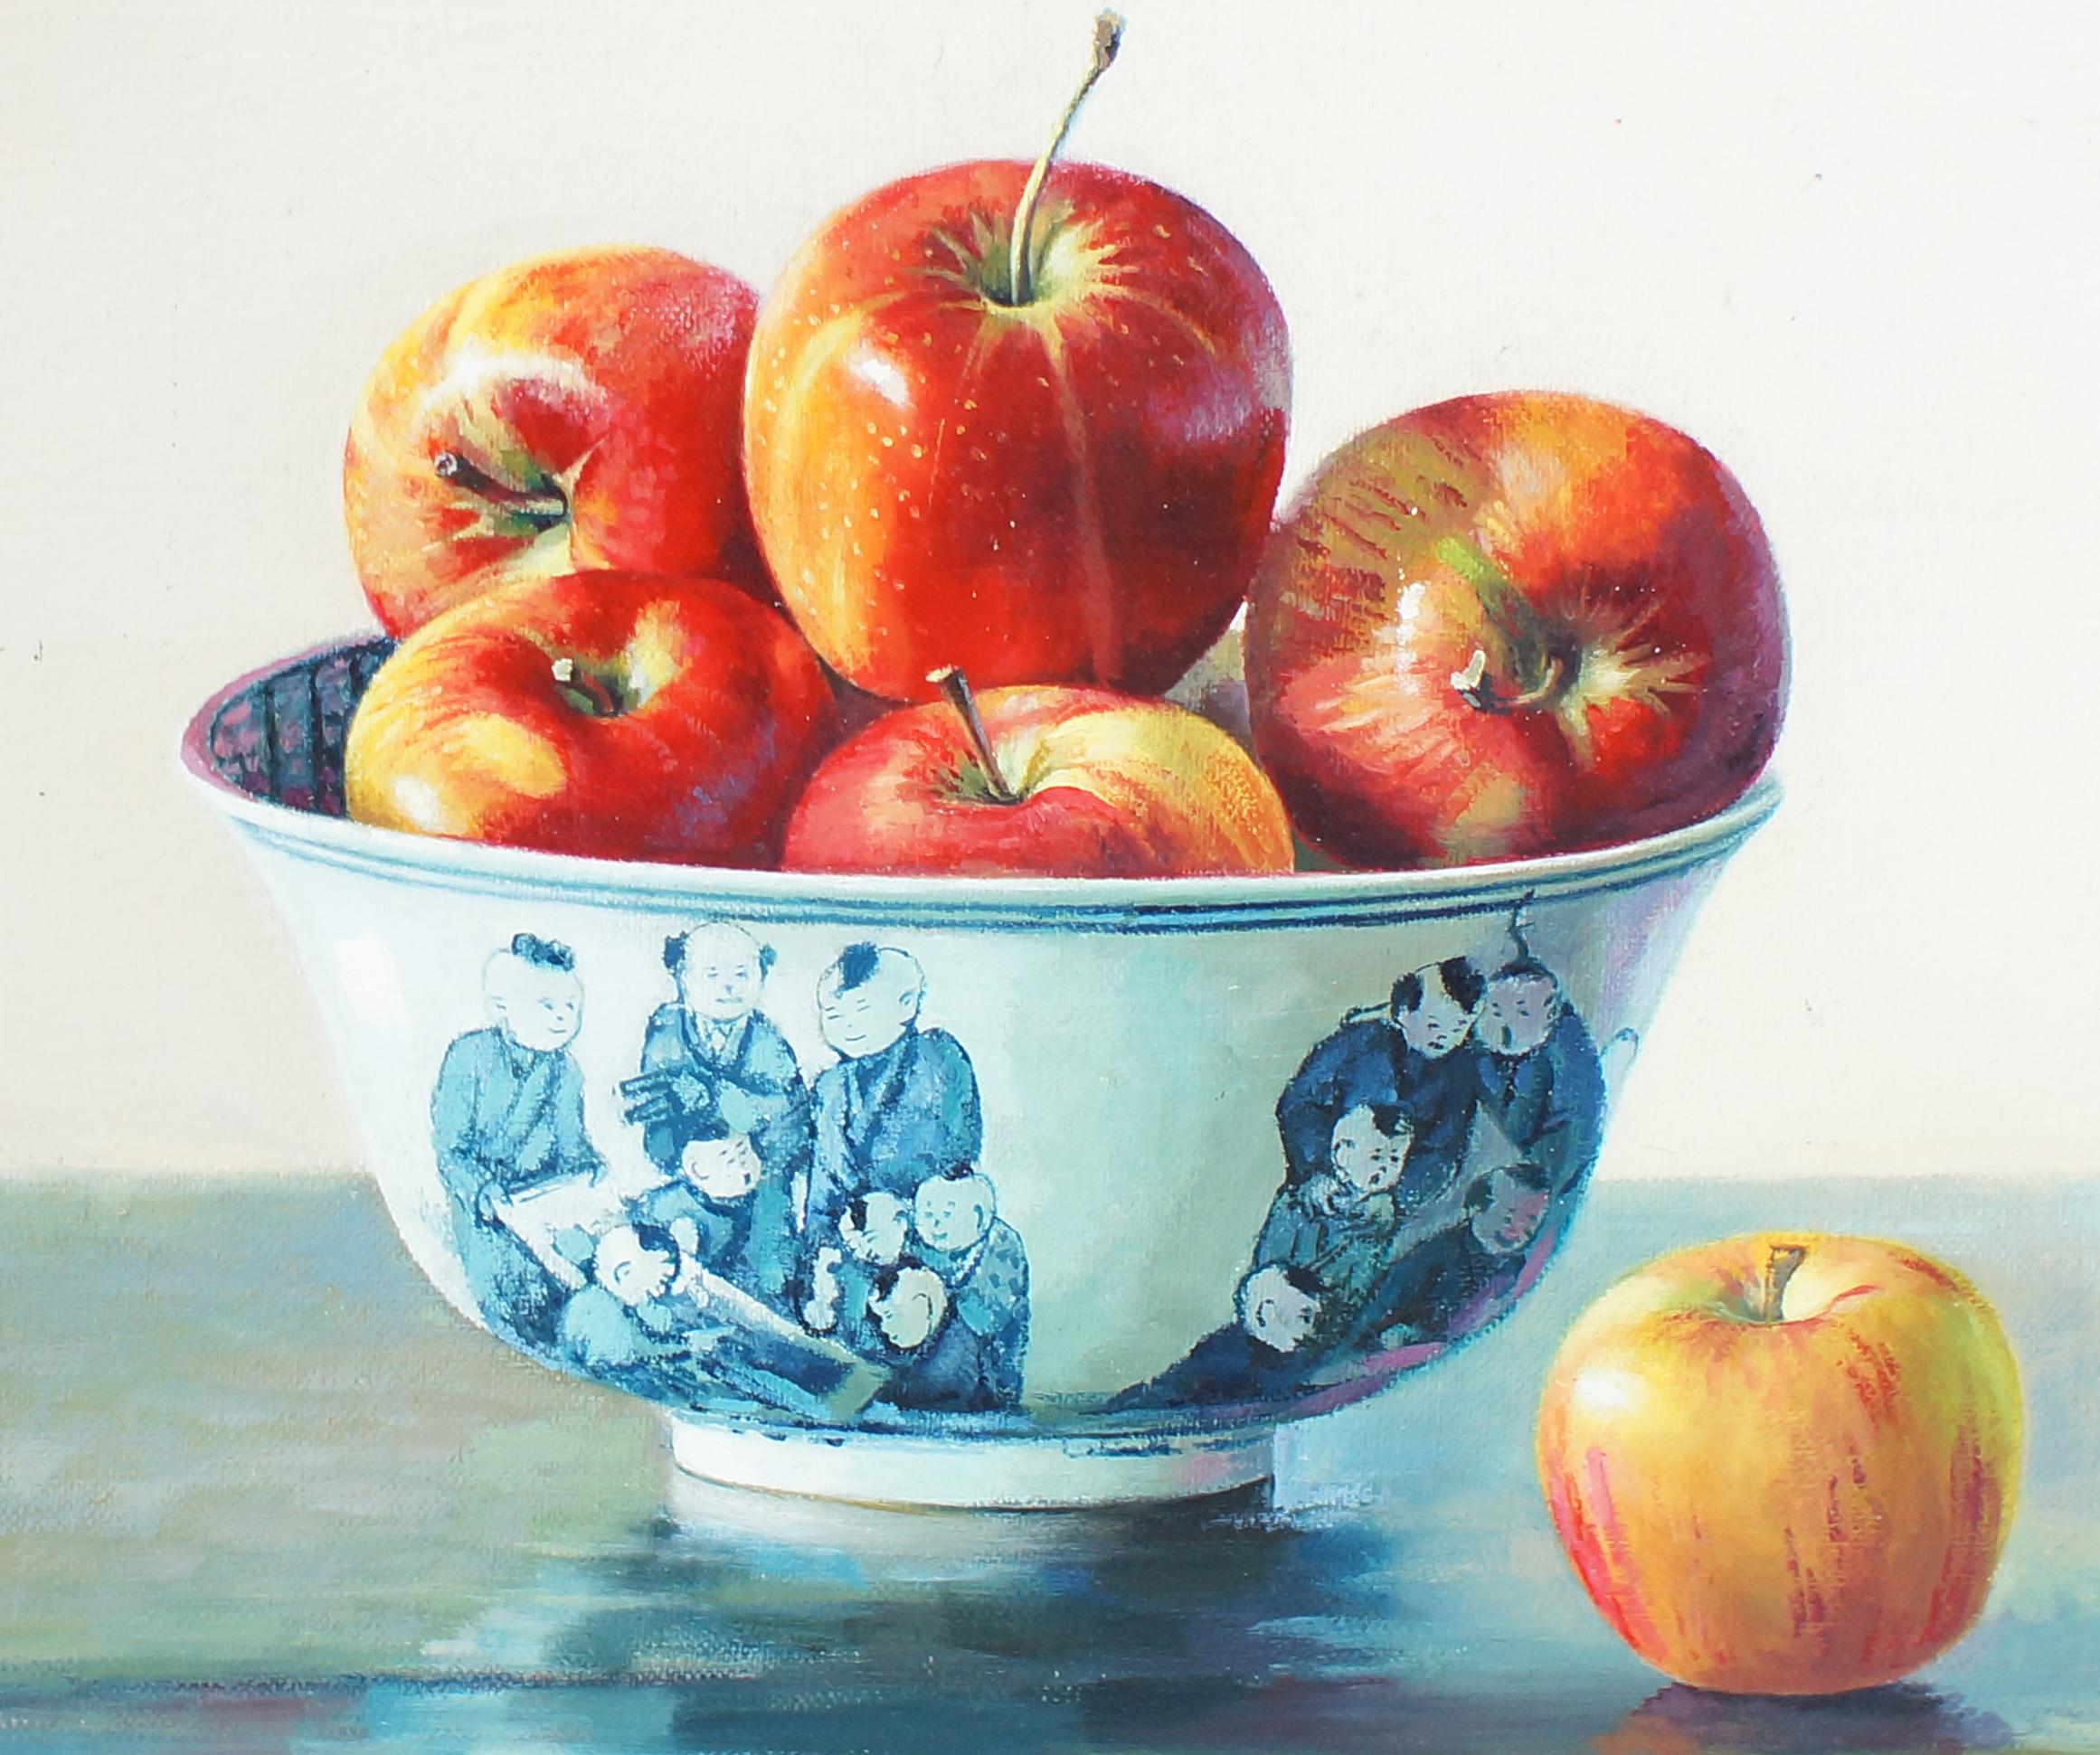 Still Life wit Apples in a chinese porcelain pot by the chinese painter Zhang Wei Guang (Mirror).
Excellent conditions.

Zhang Wei Guang, also called ‘mirror' was born in Helong Jang, China in 1968. He studied at the Haierbin Teacher University and